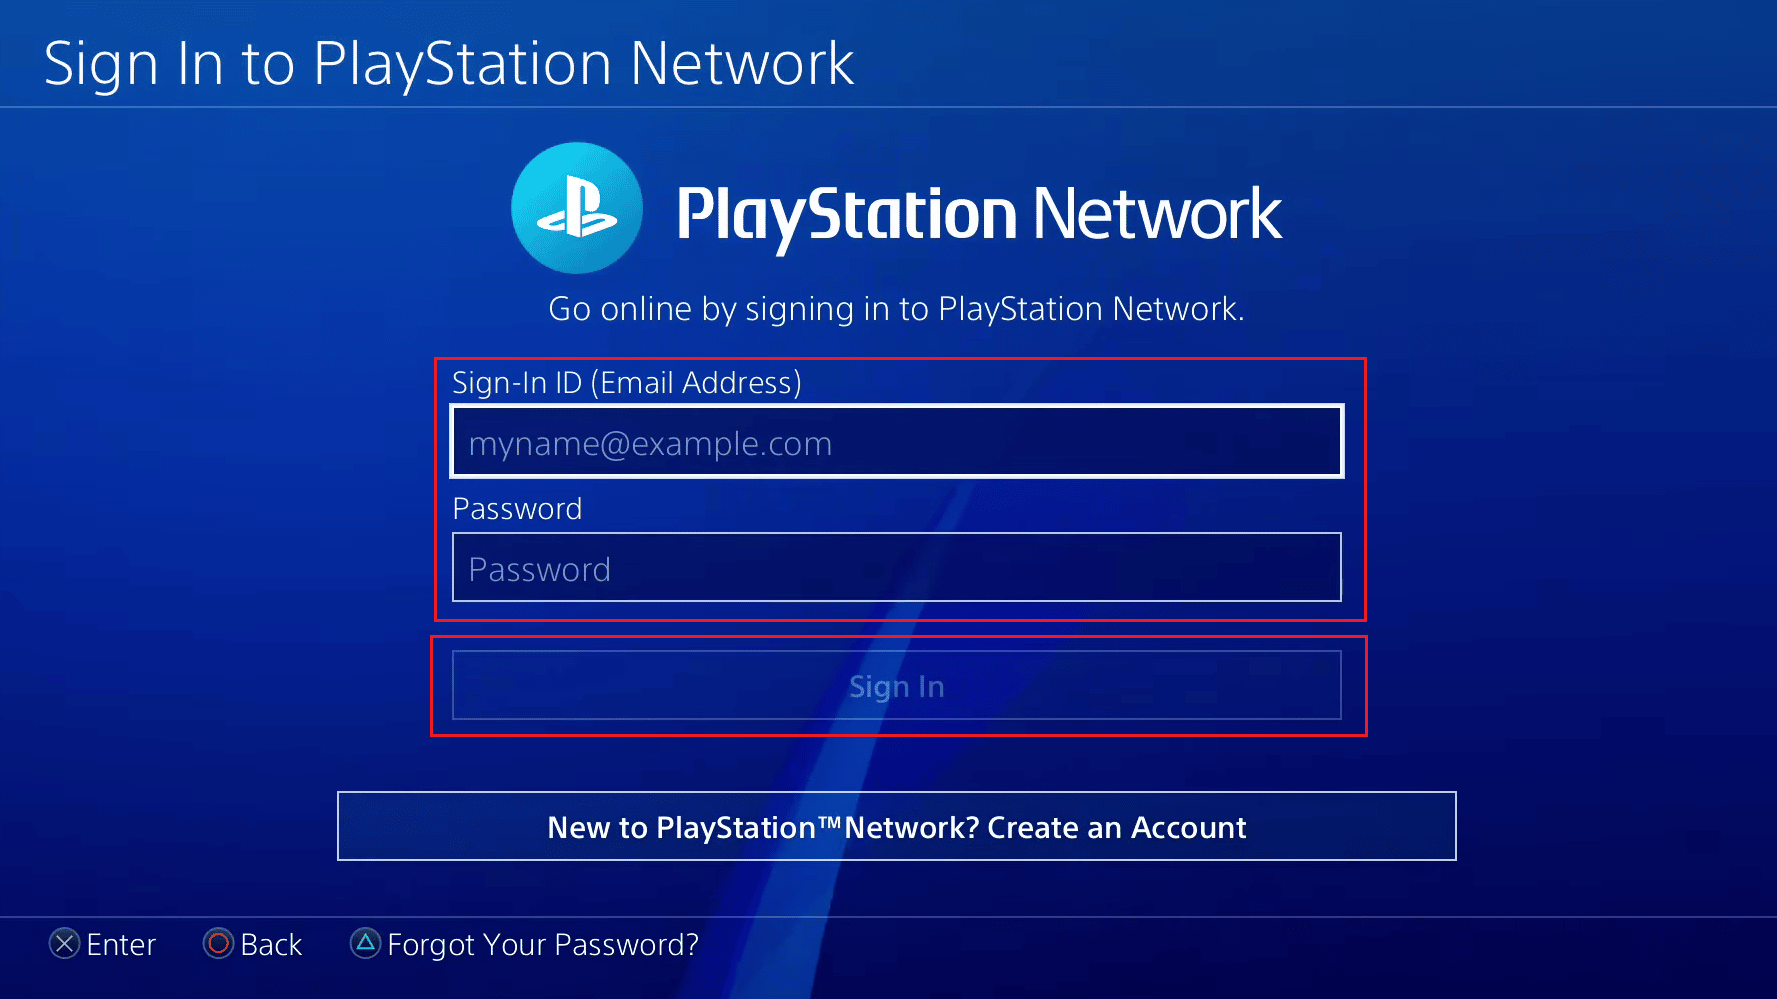 Enter your Sign-In ID (Email Address) and Password and select the Sign In | add another PSN account to PS4